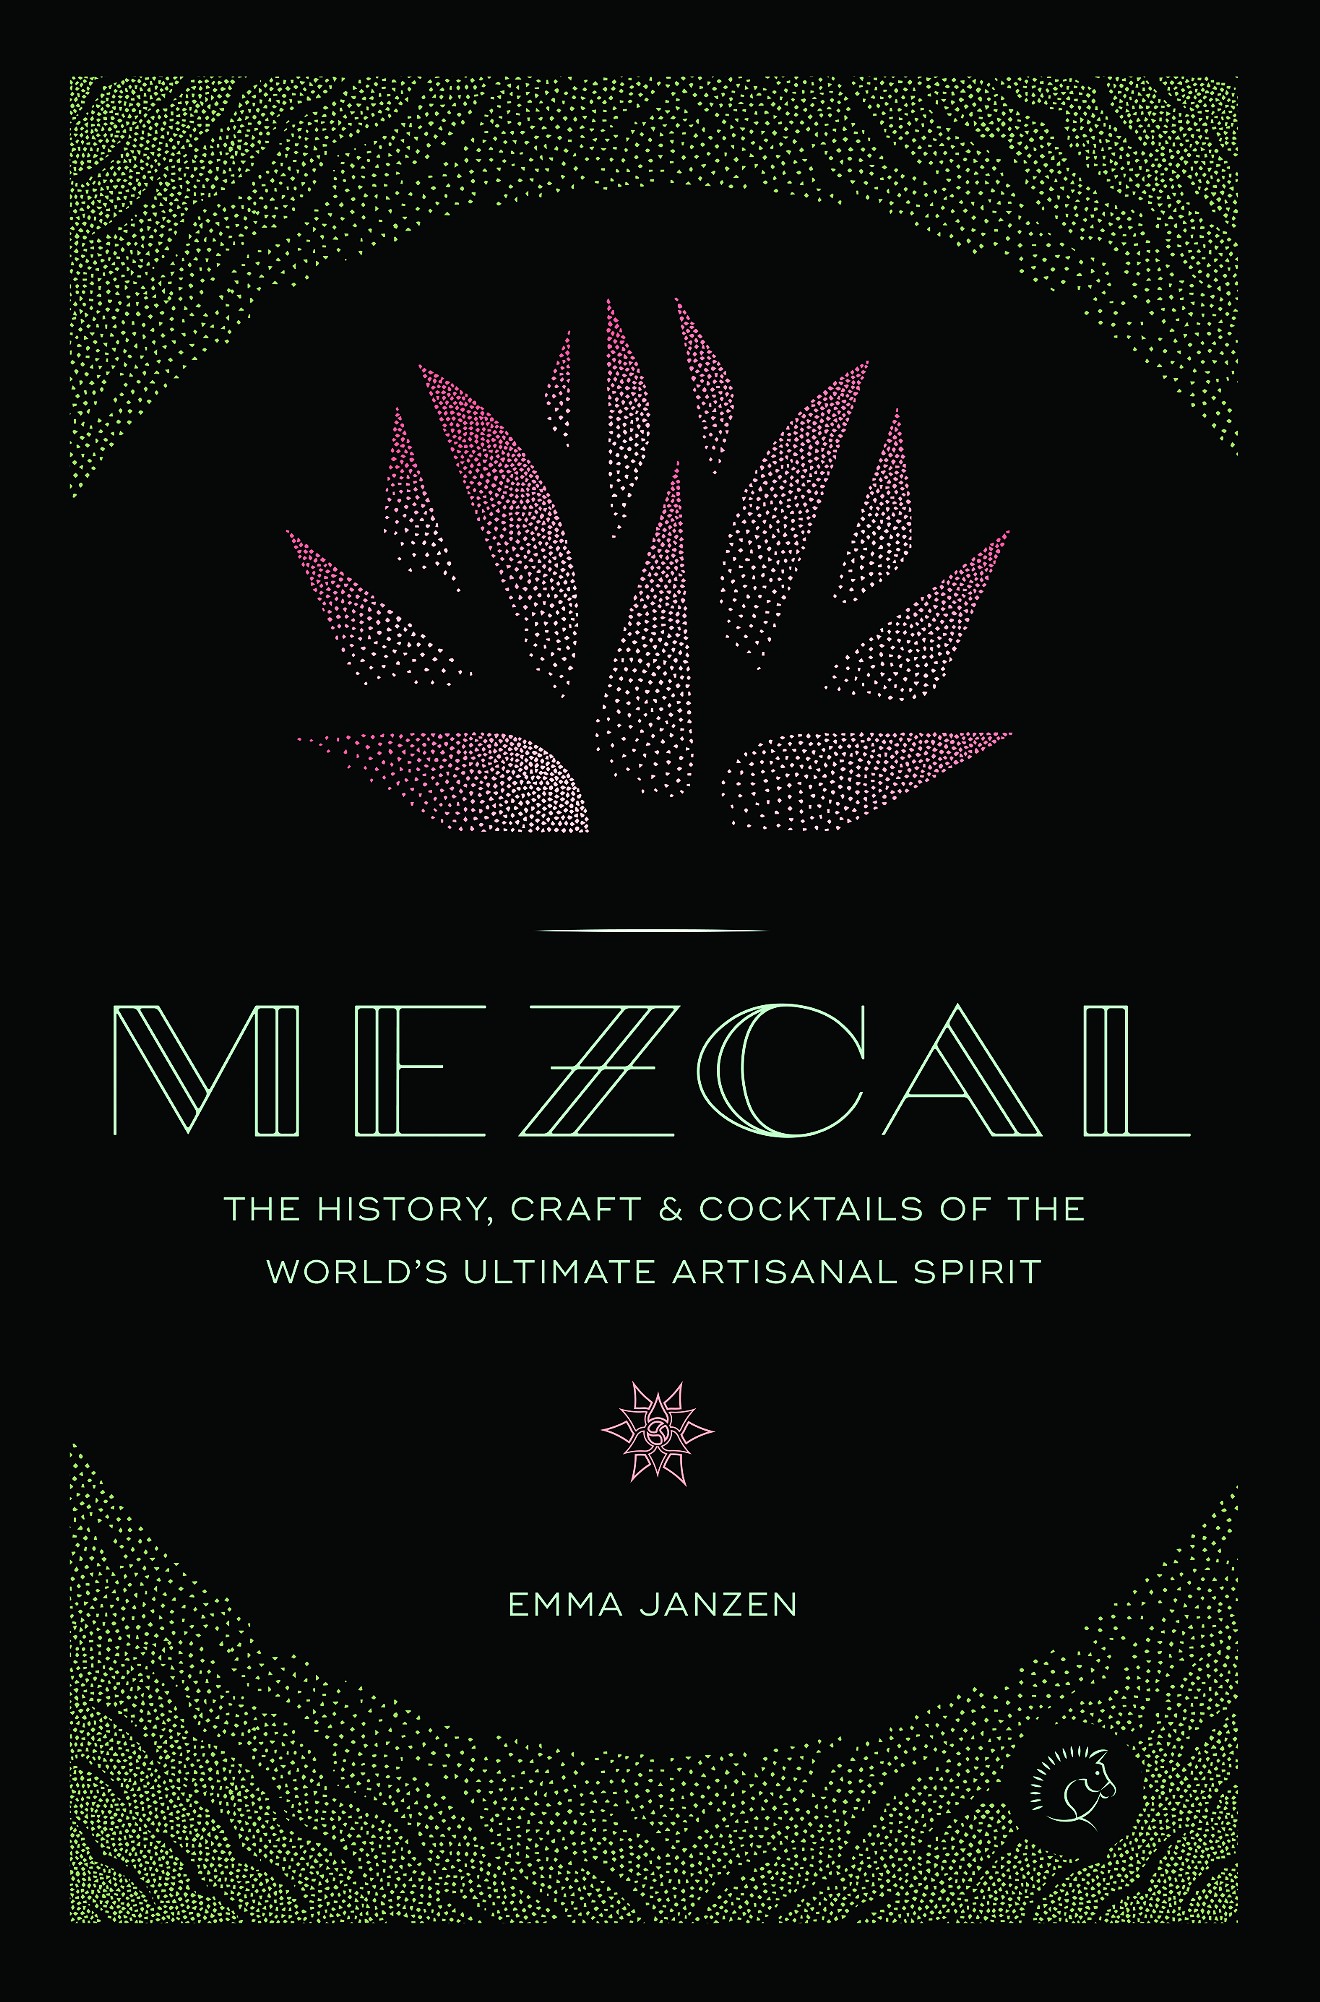 Learn about the nuances of mezcal in this new book by Emma Janzen.